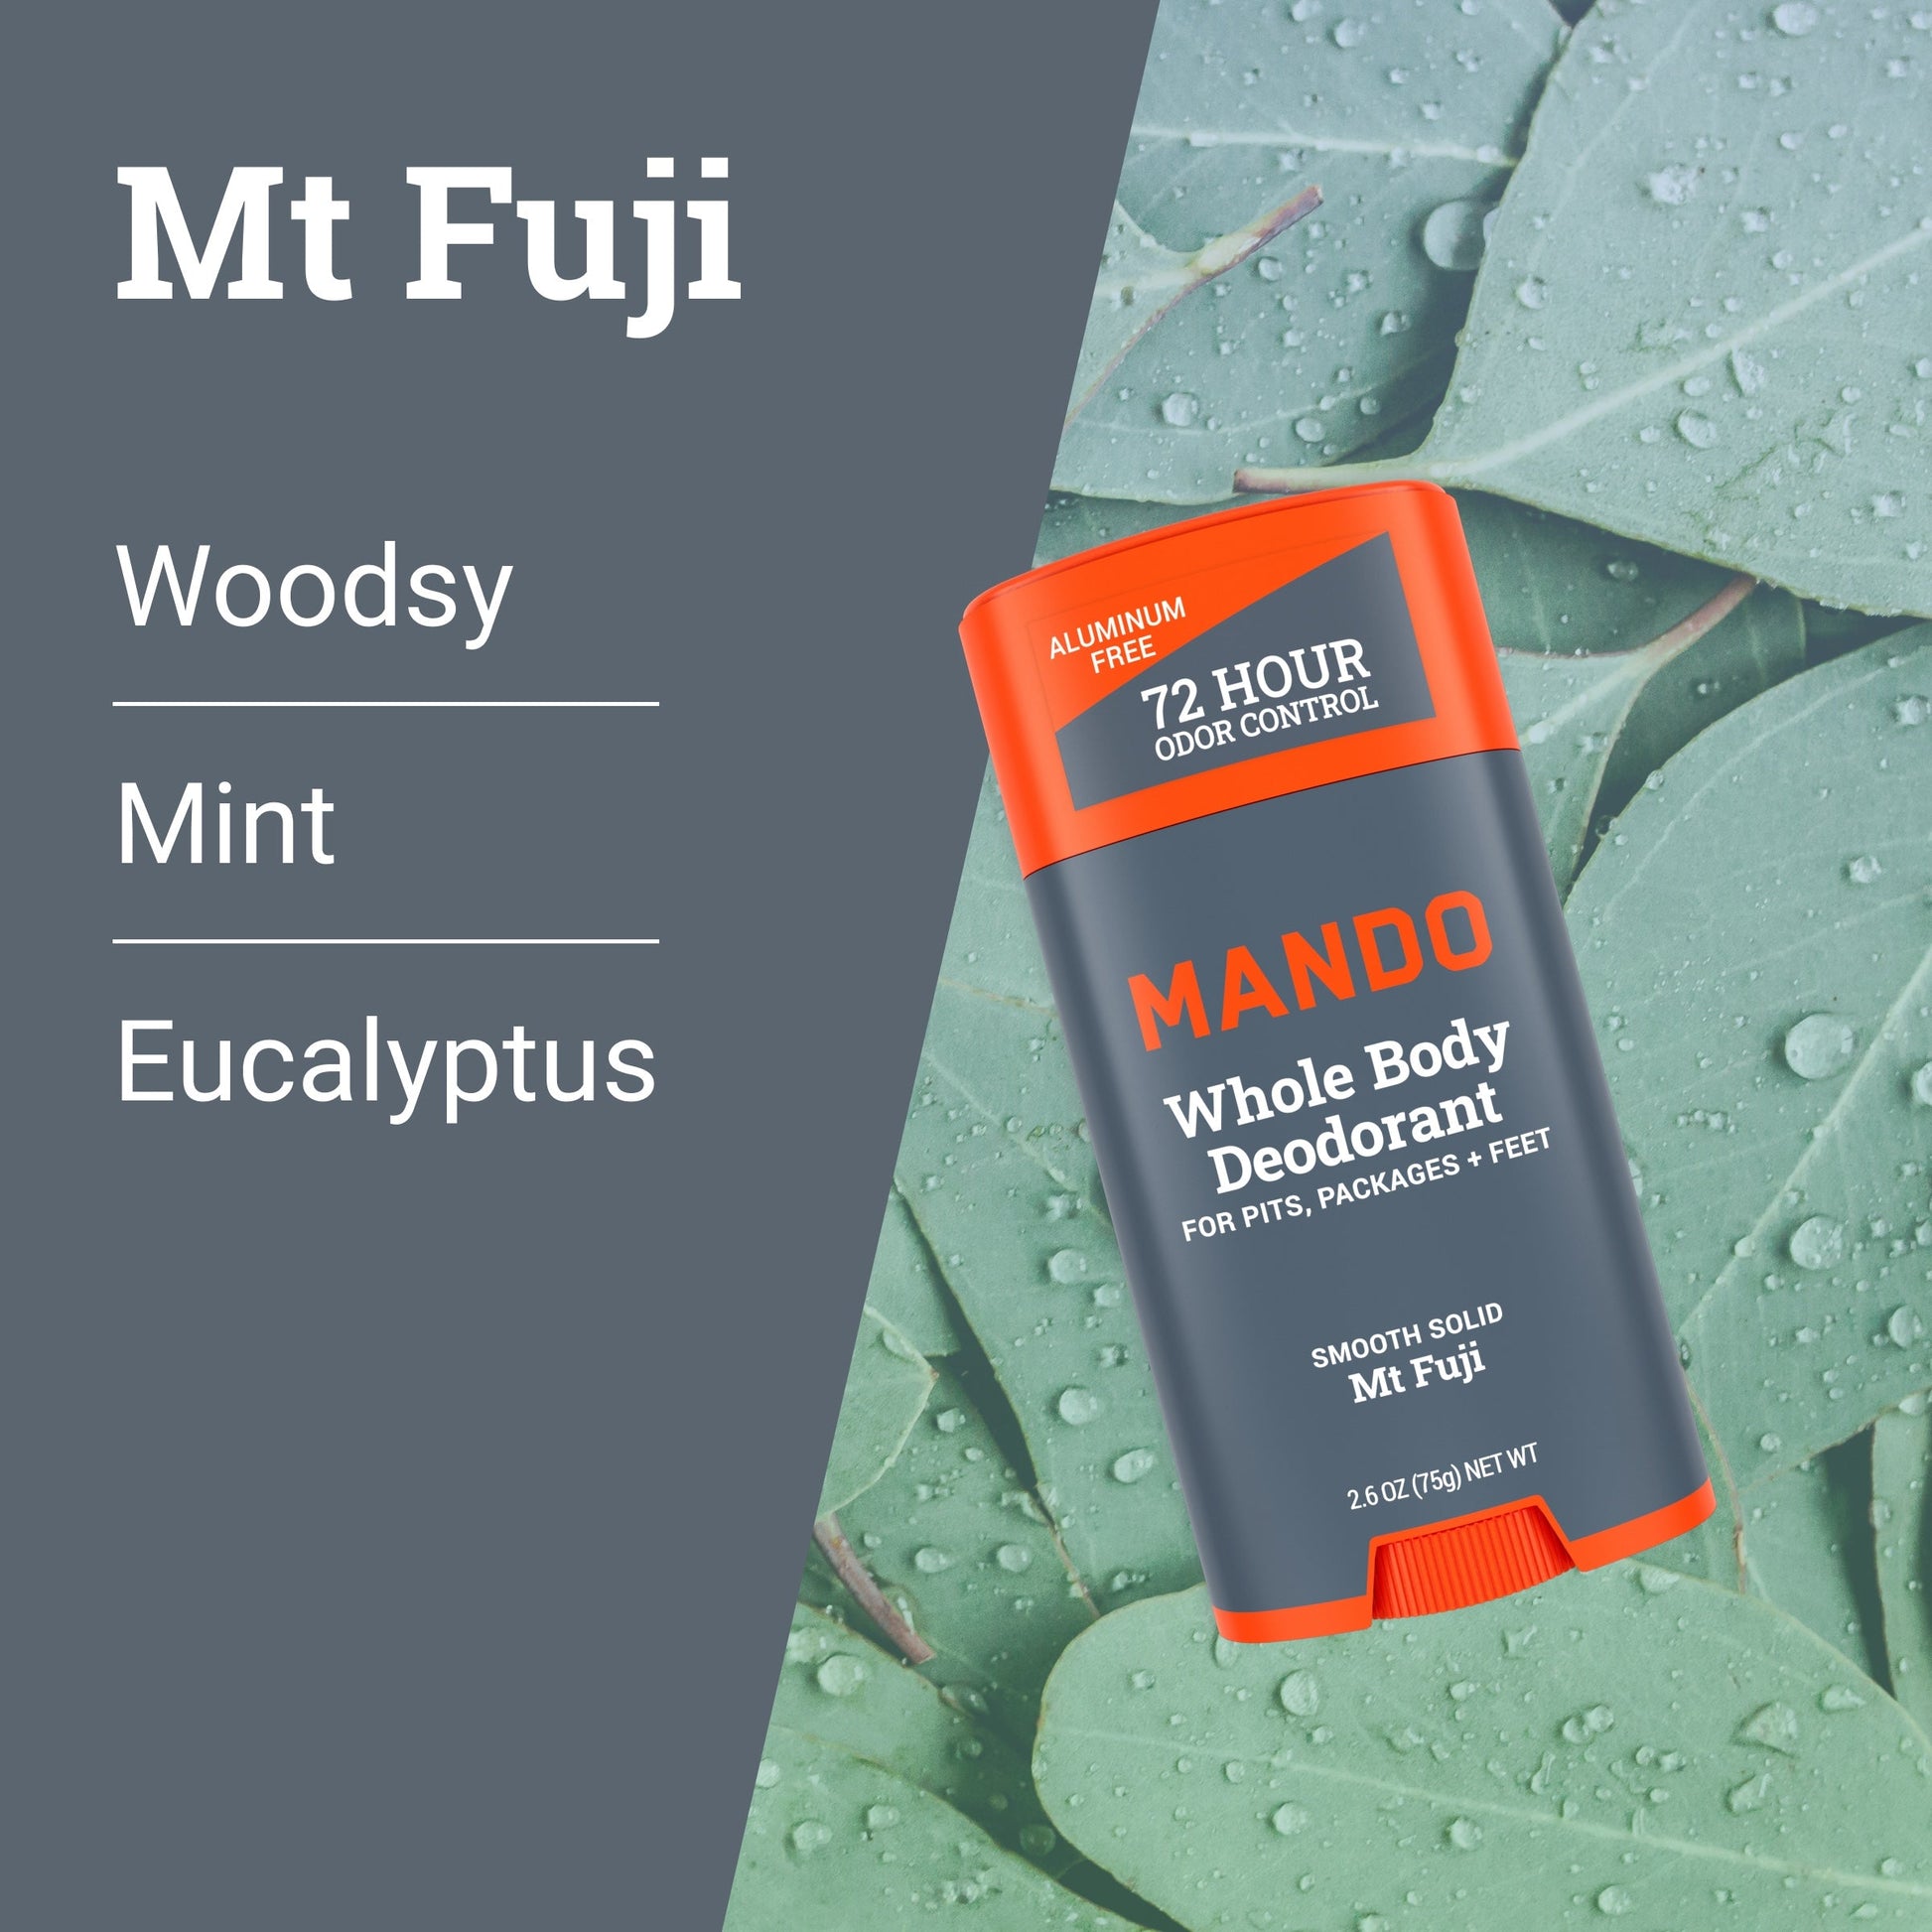 Mando smooth solid deodorant in Mt Fuji scent with text: woodsy, mint, eucalyptus